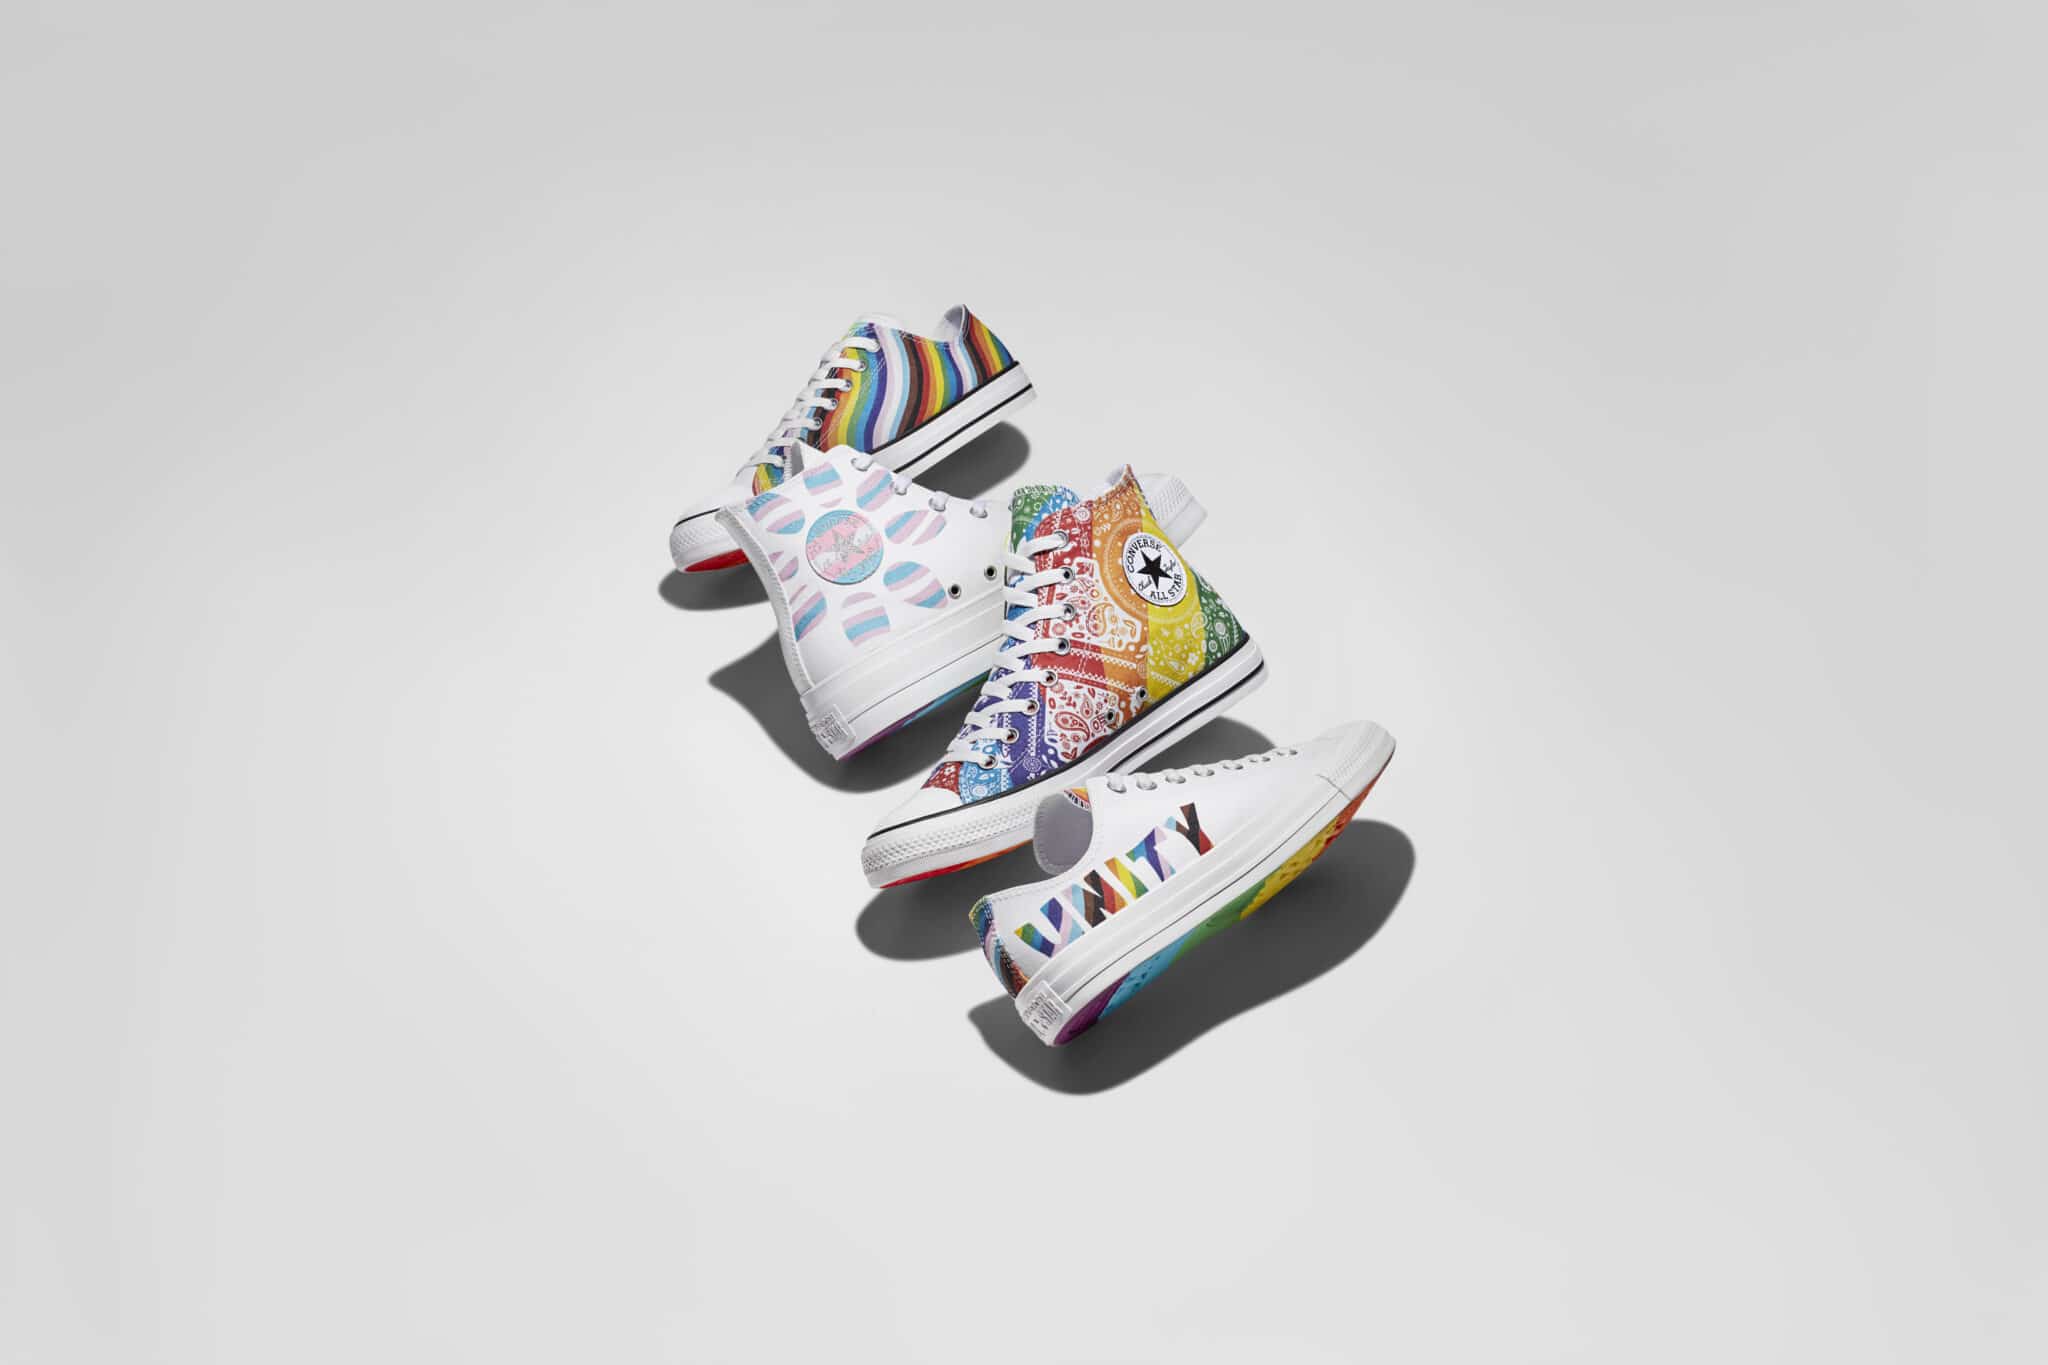 Fans of Converse can customise their own sneakers using Pride flag-inspired designs.